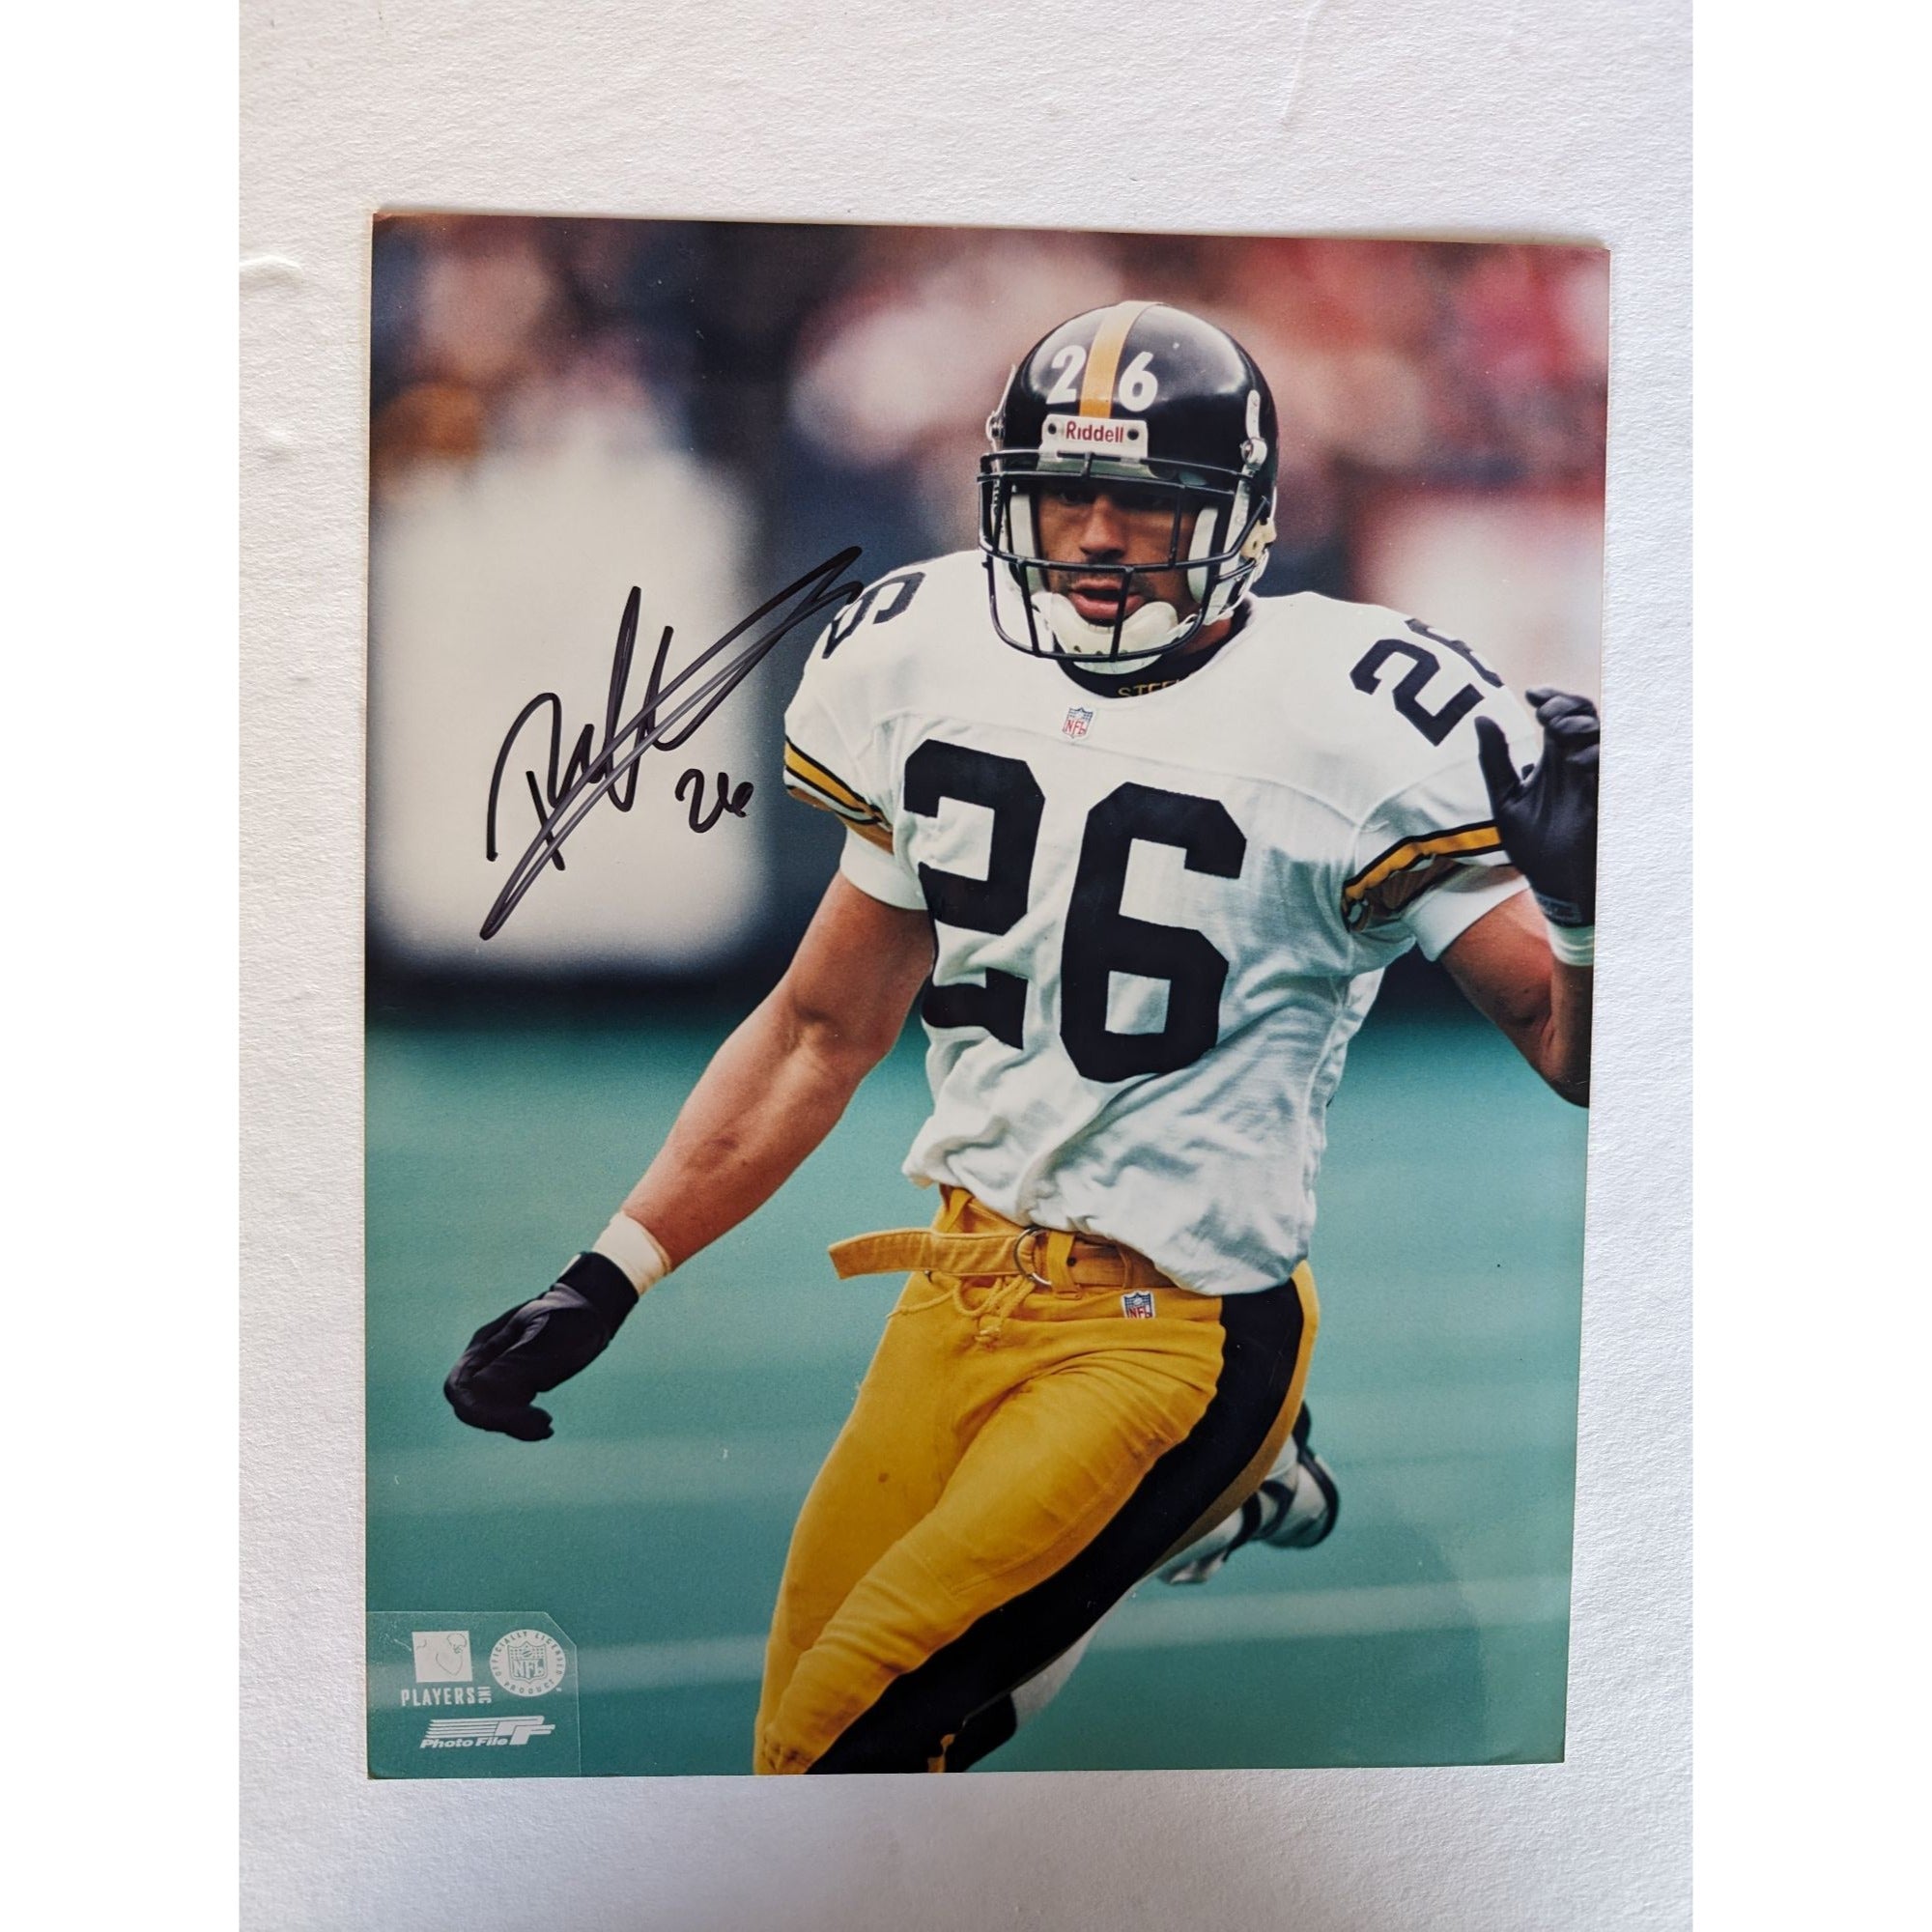 Rod Woodson Pittsburgh Steelers NFL Hall of Famer 8x10 photo signed